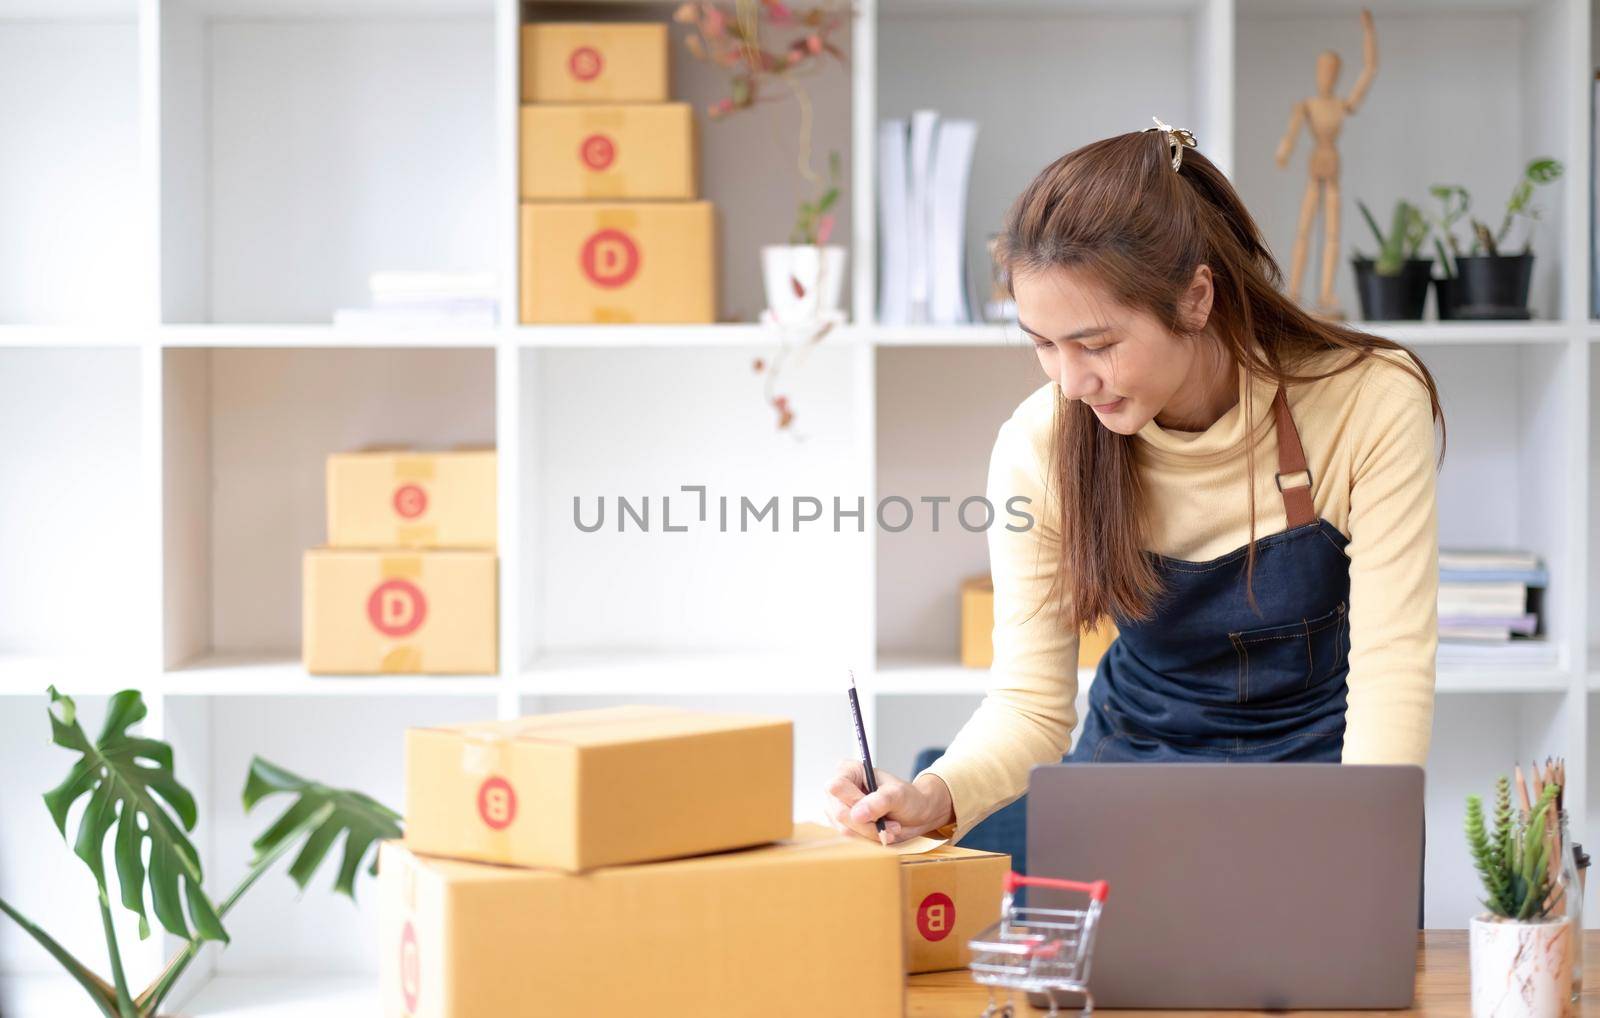 Starting small businesses SME owners female entrepreneurs Write the address on receipt box and check online orders to prepare to pack the boxes, sell to customers, sme business ideas online. by wichayada